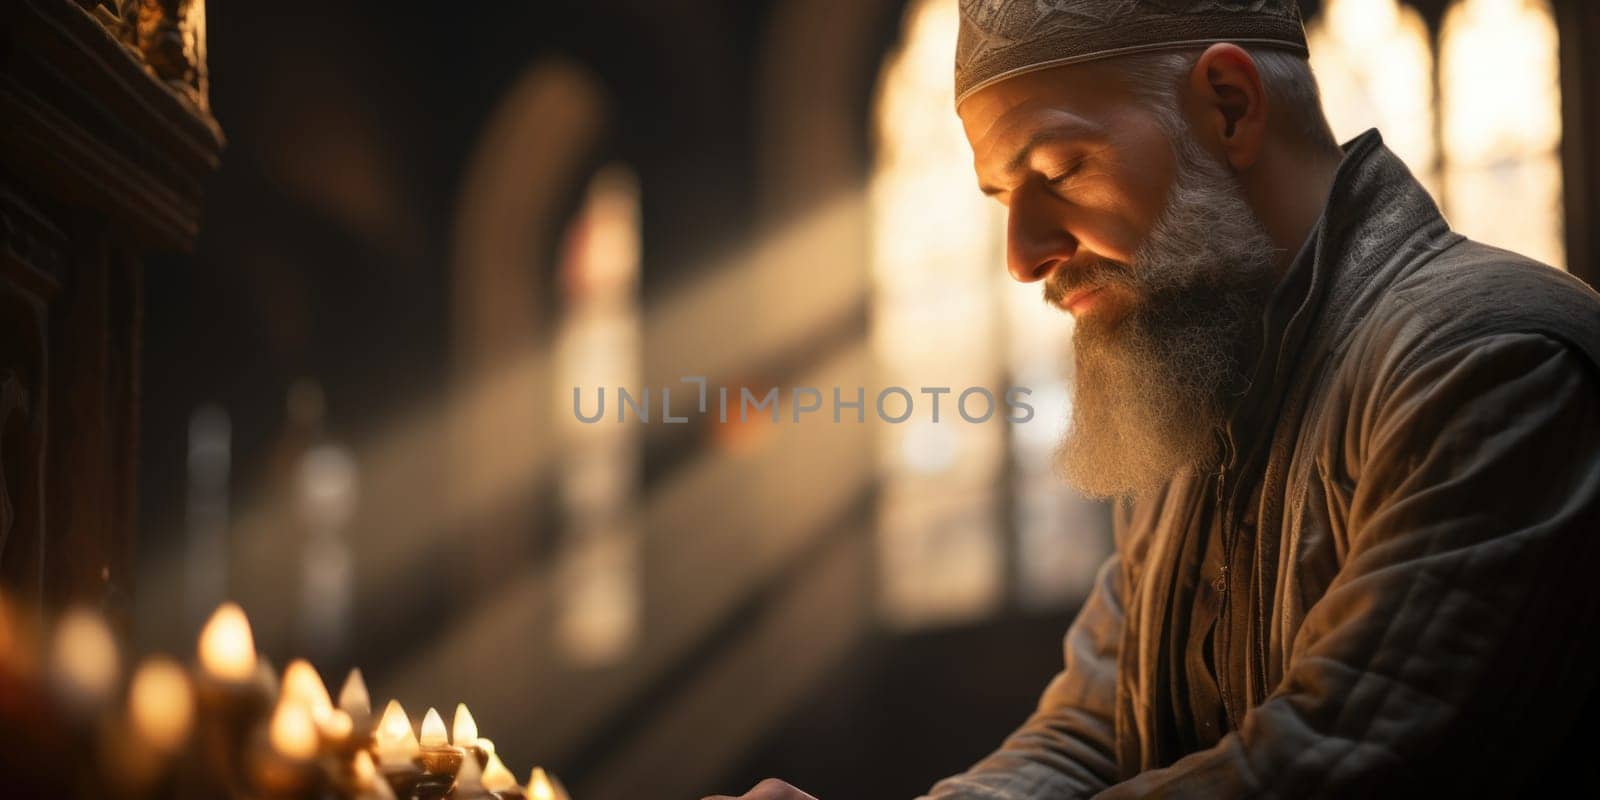 Bearded Man Looking at Cell Phone by but_photo